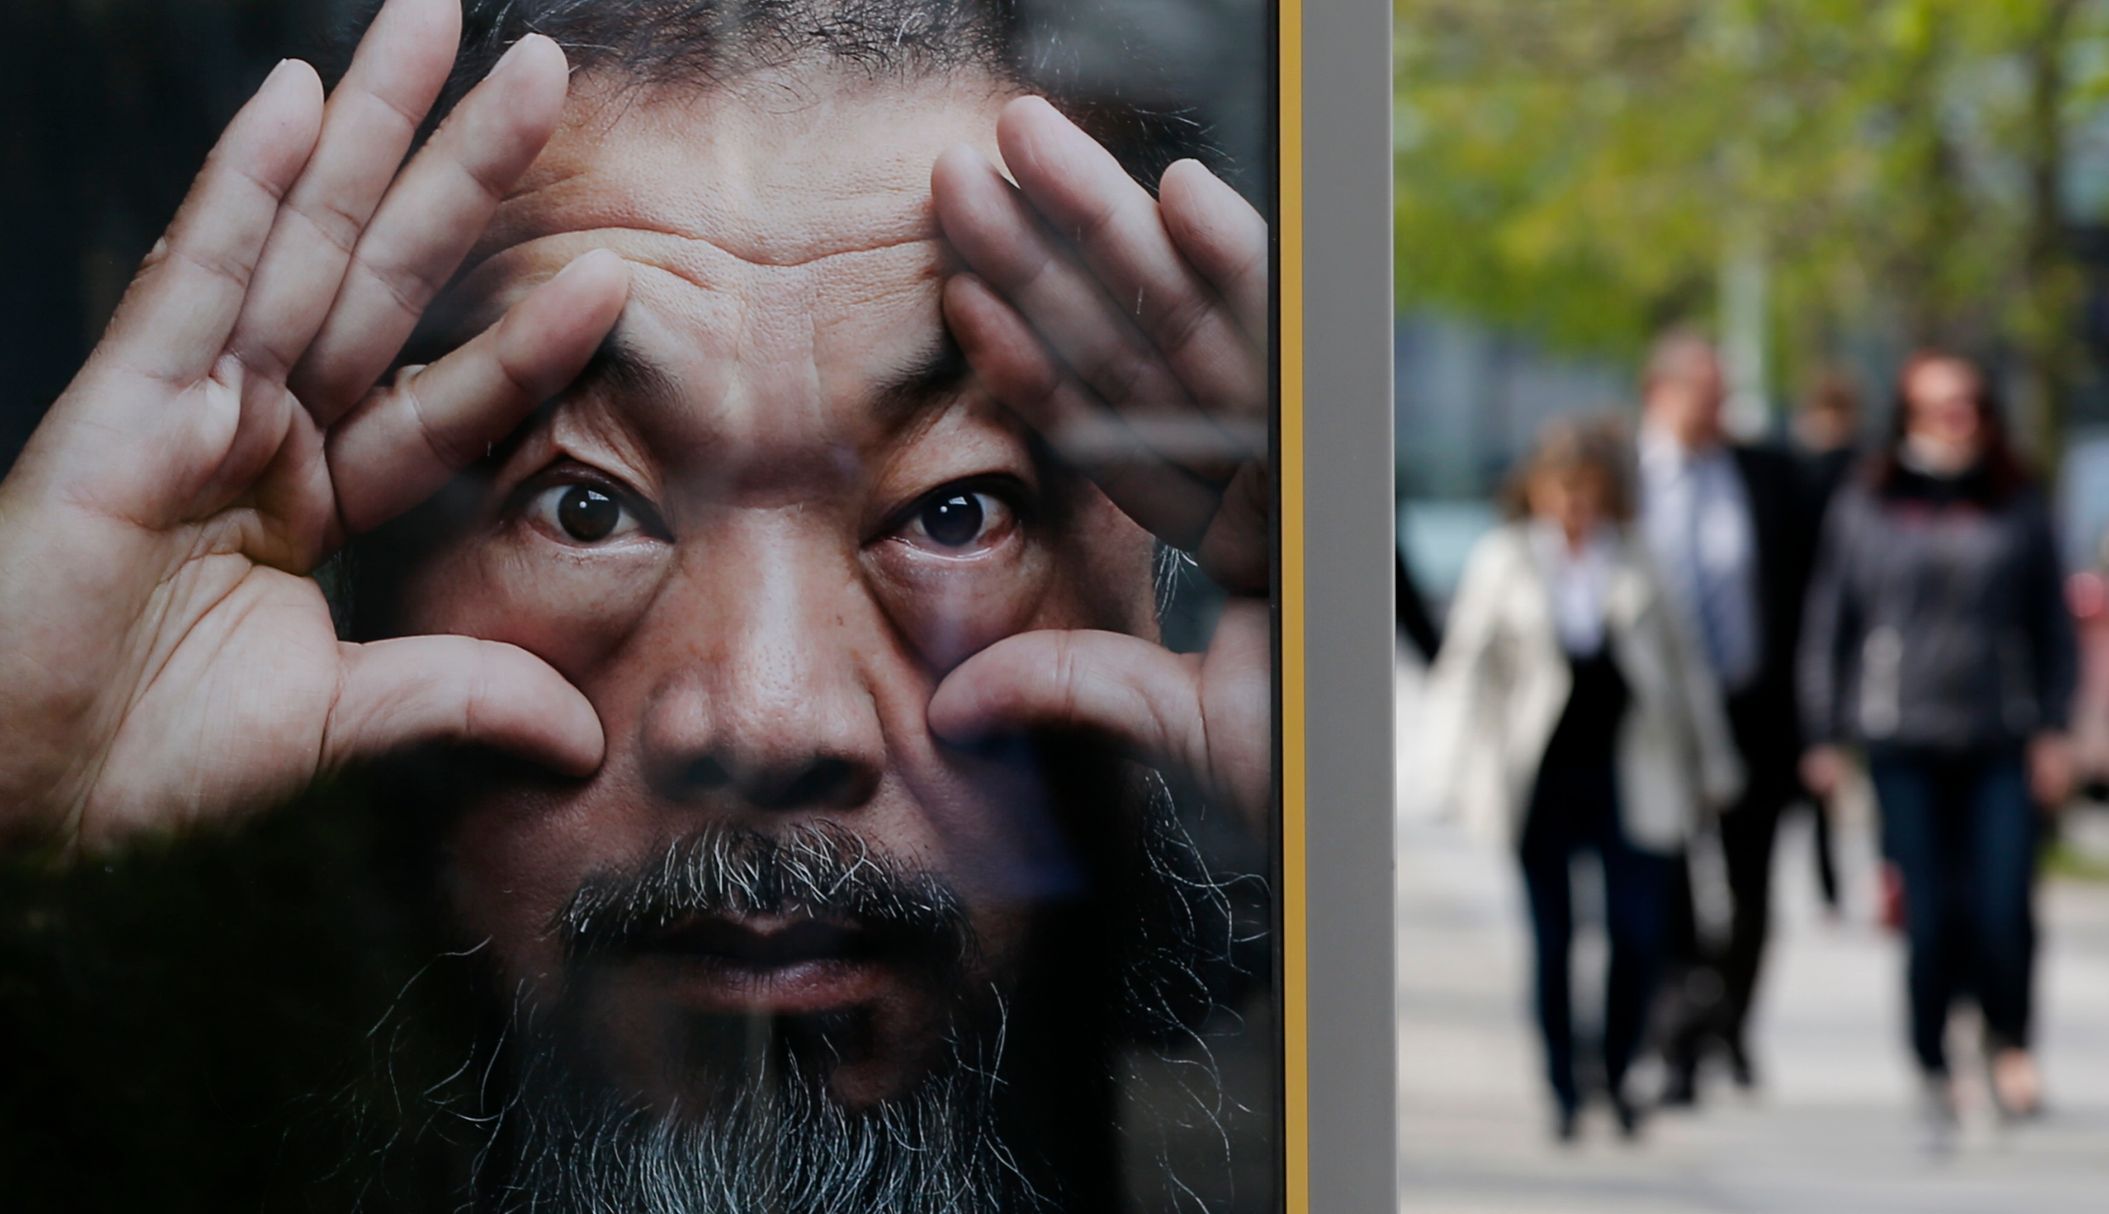 People walk beside an advertising poster for the exhibition 'Evidence' by Chinese artist Ai Weiwei at the Martin-Gropius Bau in Berlin